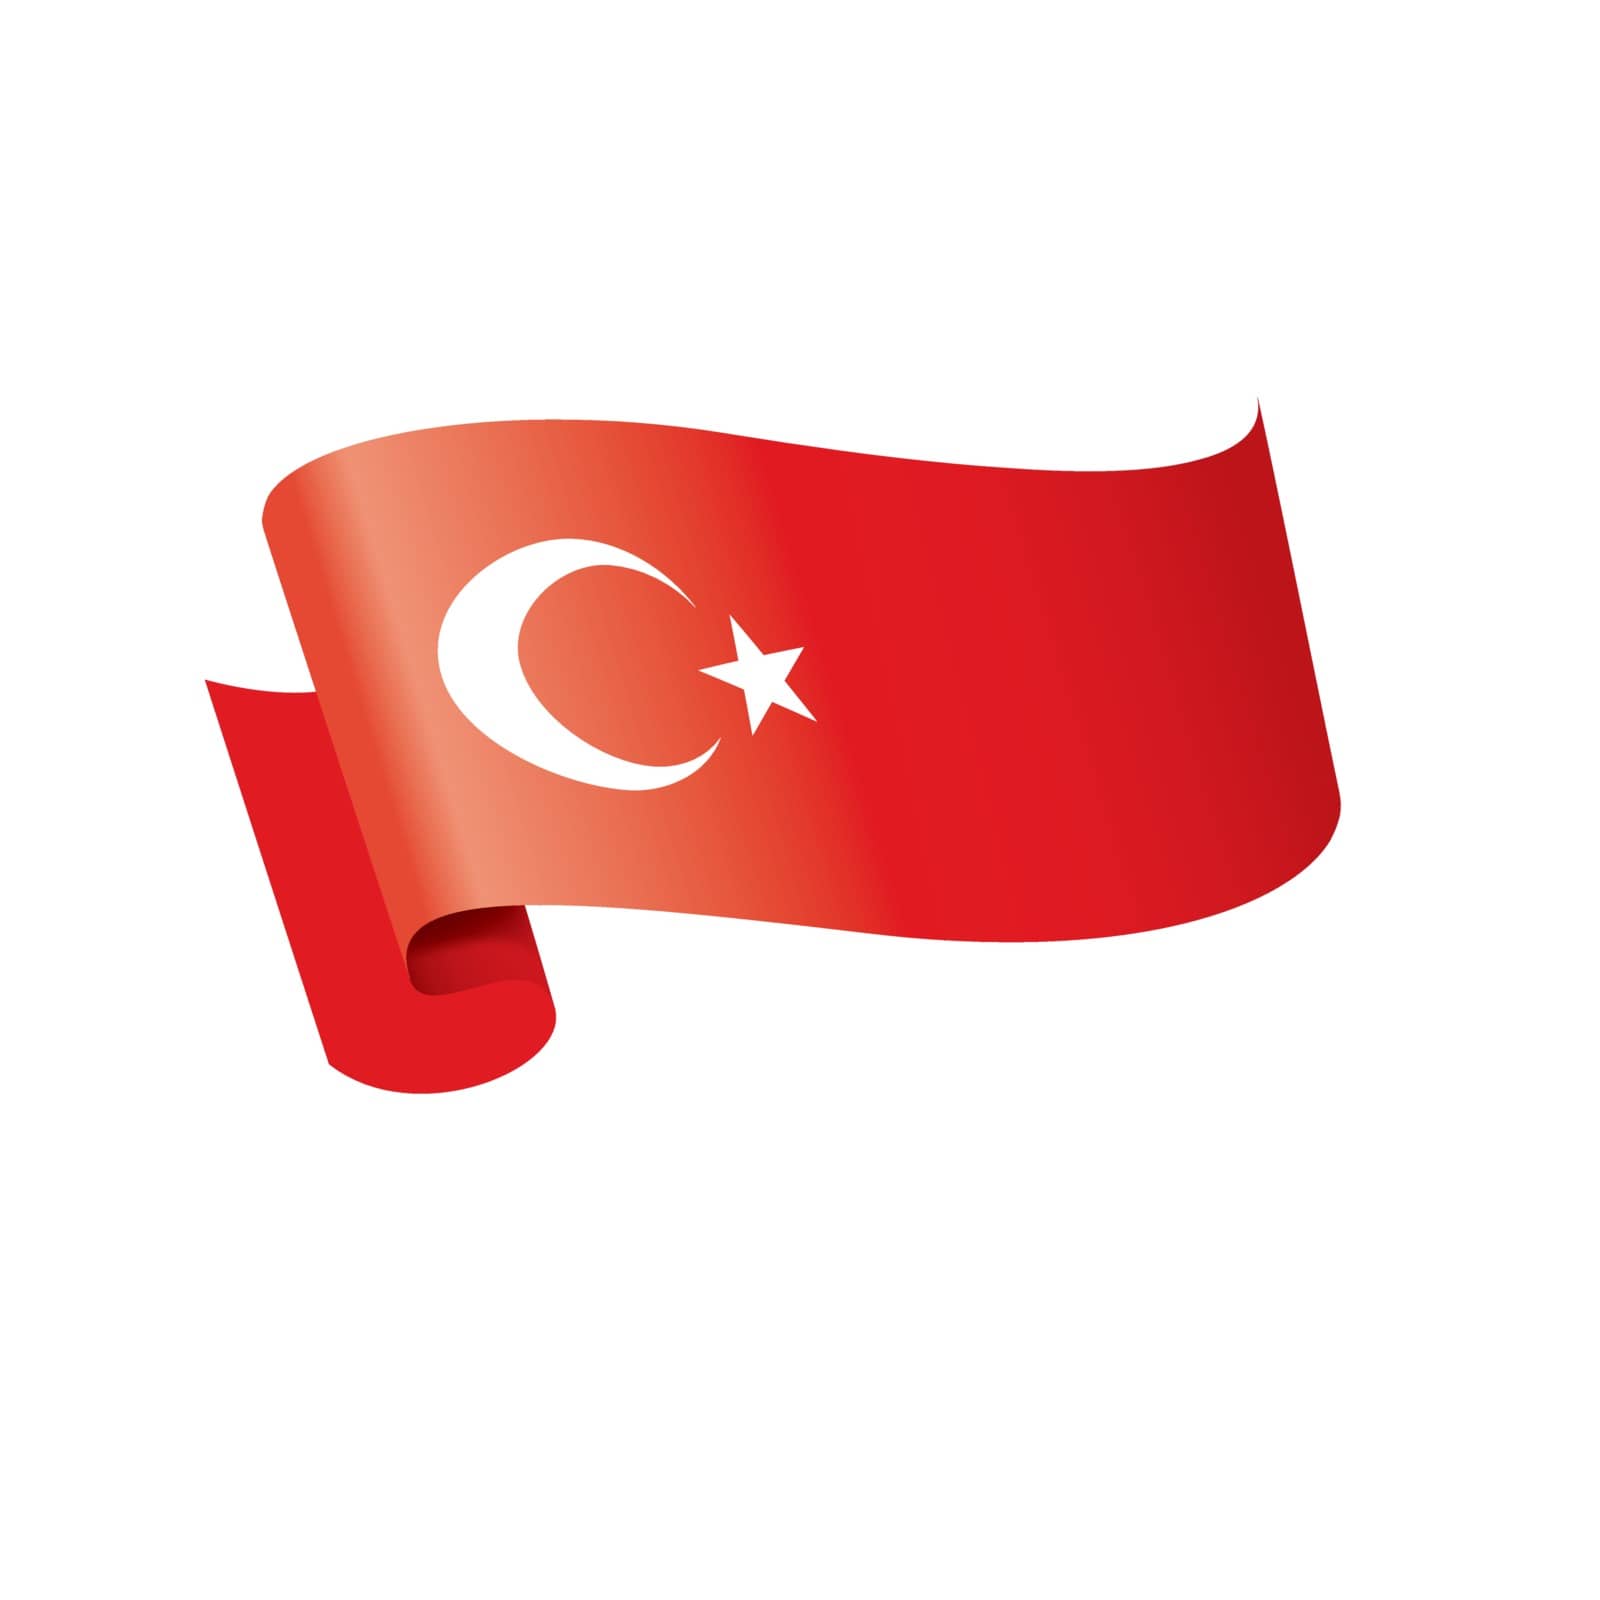 Turkey flag, vector illustration on a white background by butenkow